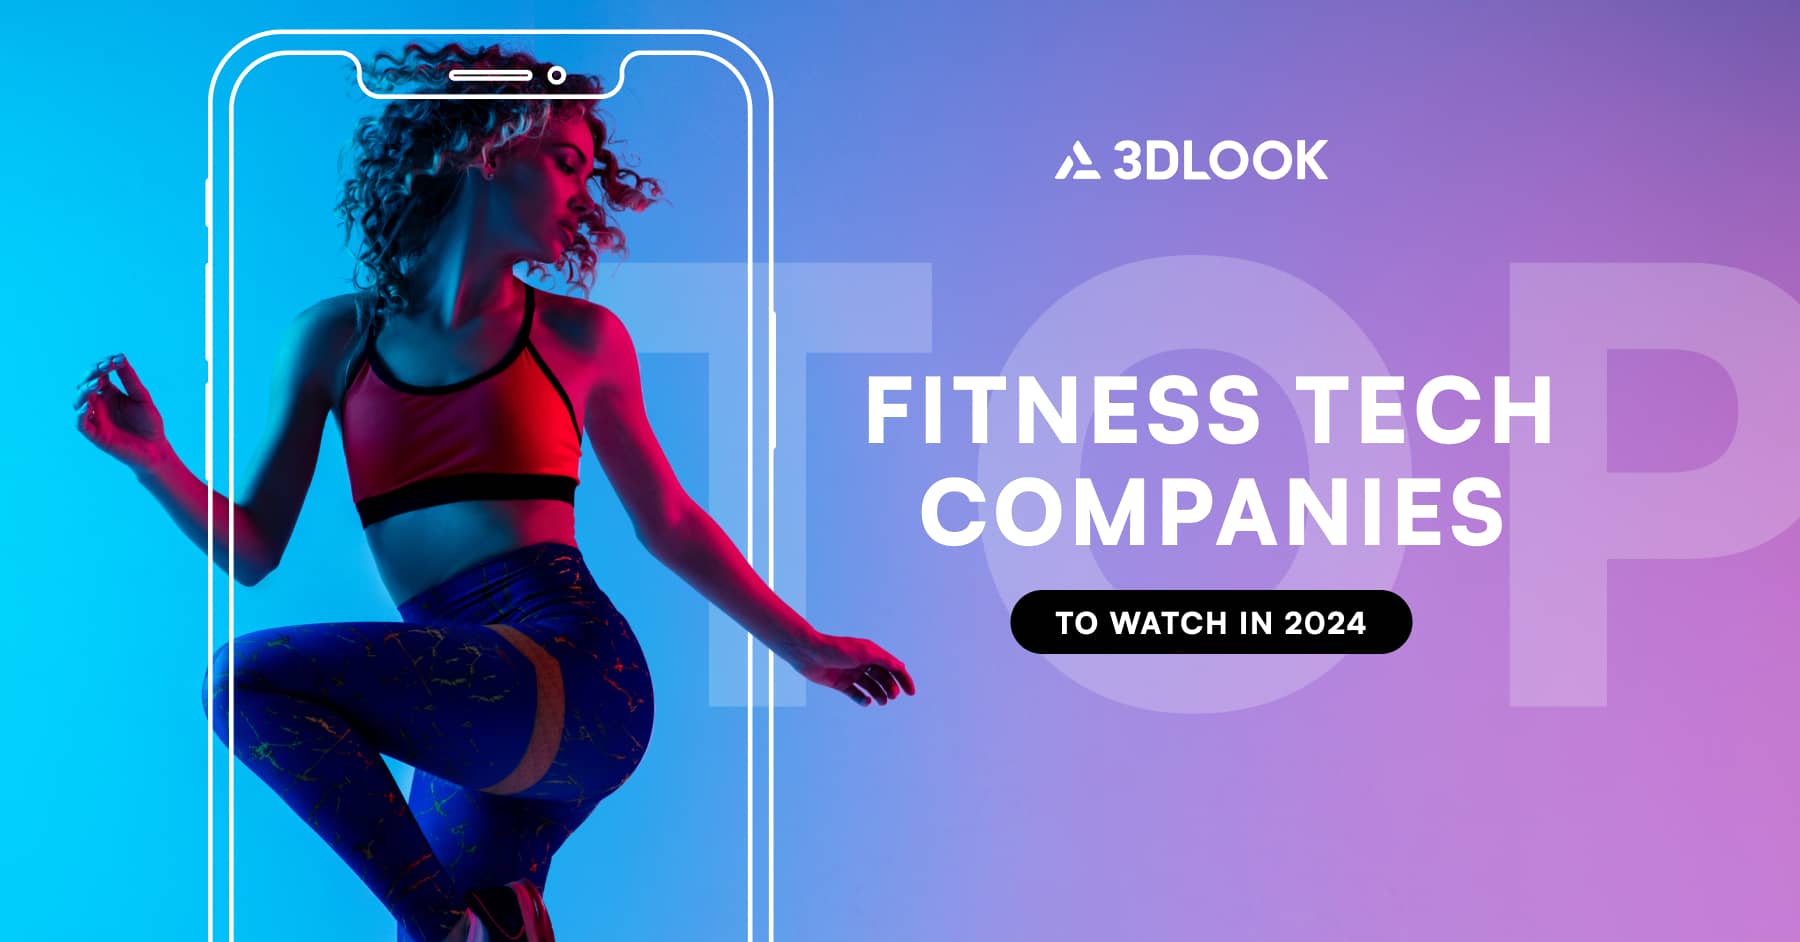 A person in athletic wear appears within the outline of a smartphone against a vibrant blue and pink background. Text reads "Top Fitness Tech Companies to Watch in 2024" with the 3DLOOK logo above.